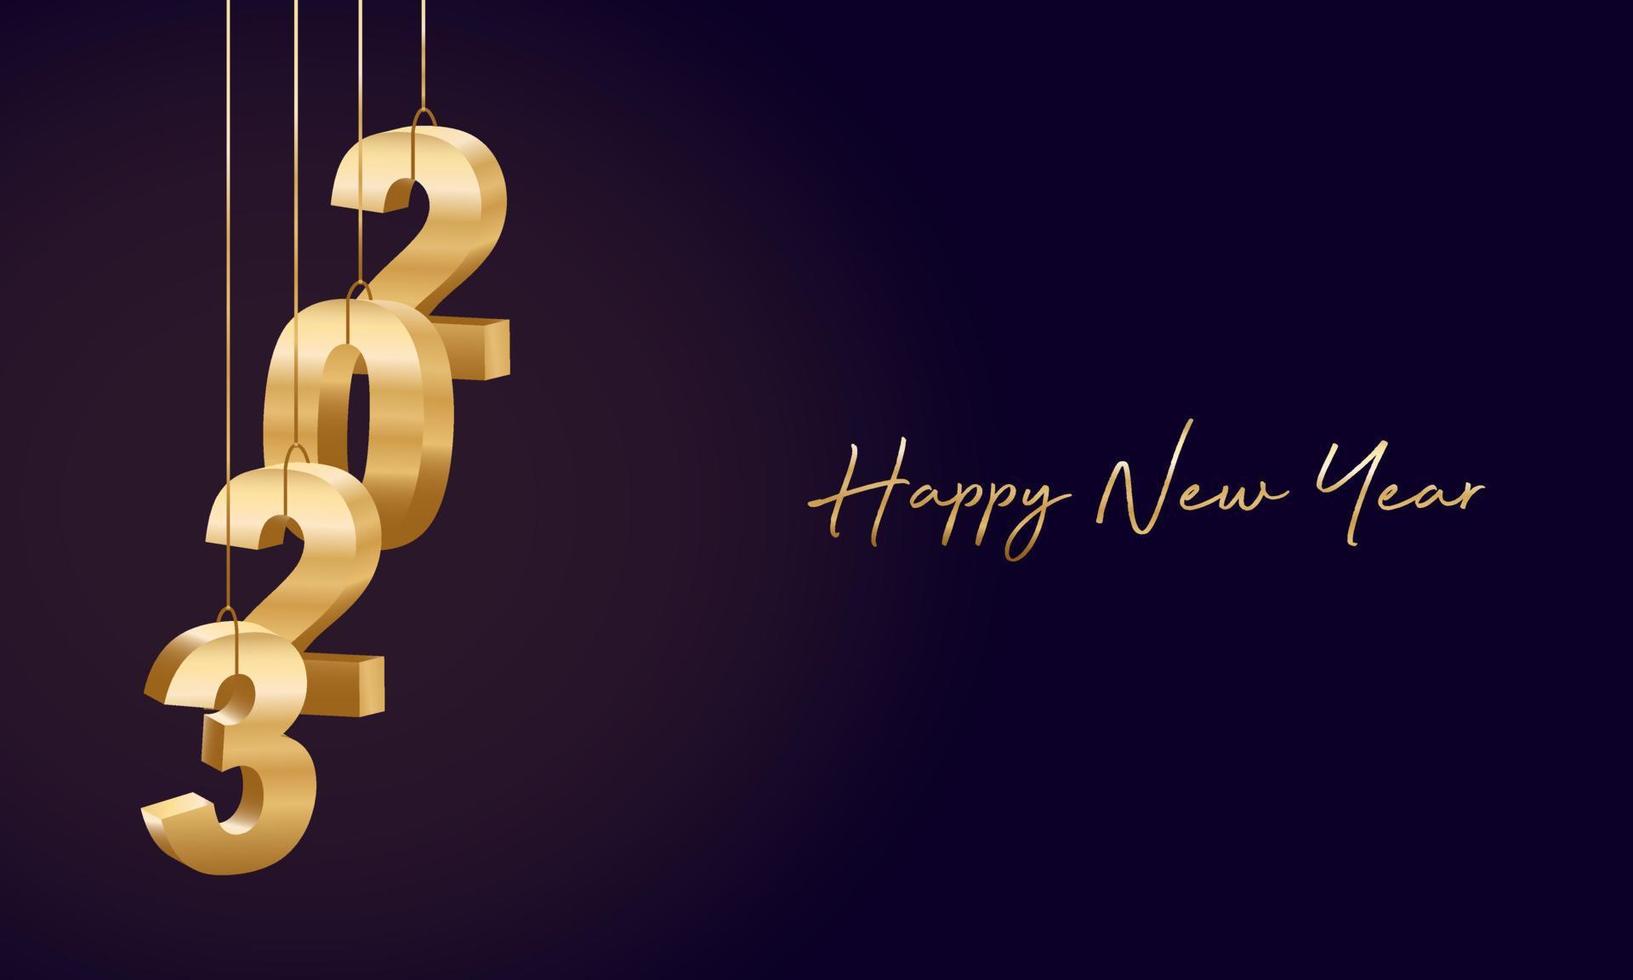 Happy New Year 2023. Hanging golden 3D numbers with ribbons, Modern Happy New Year Background vector